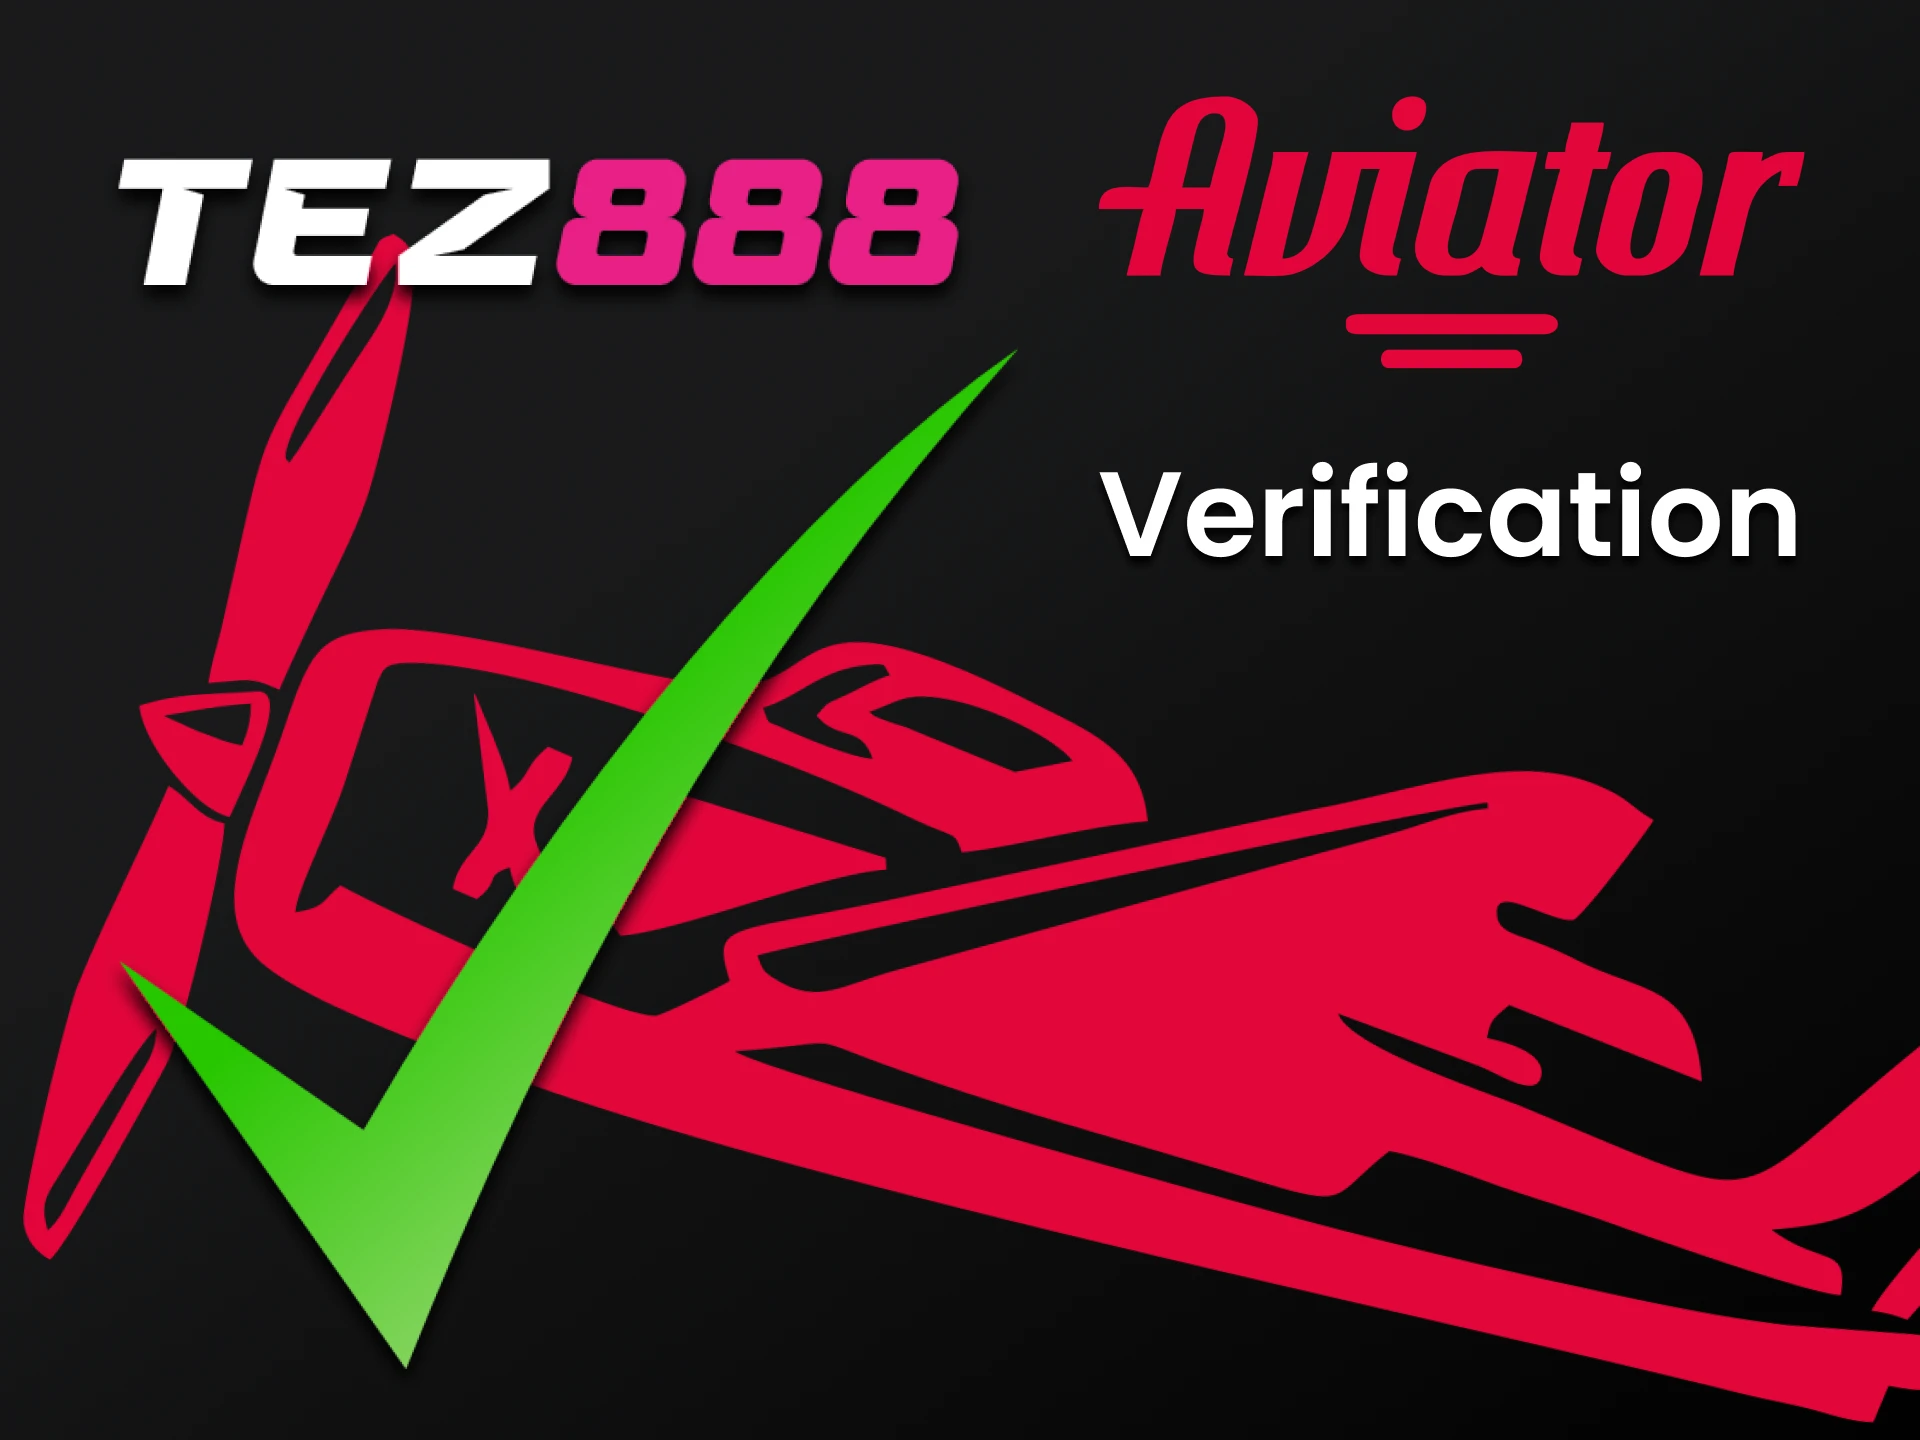 Fill out all add-ons on the Tez888 website for the game Aviator.